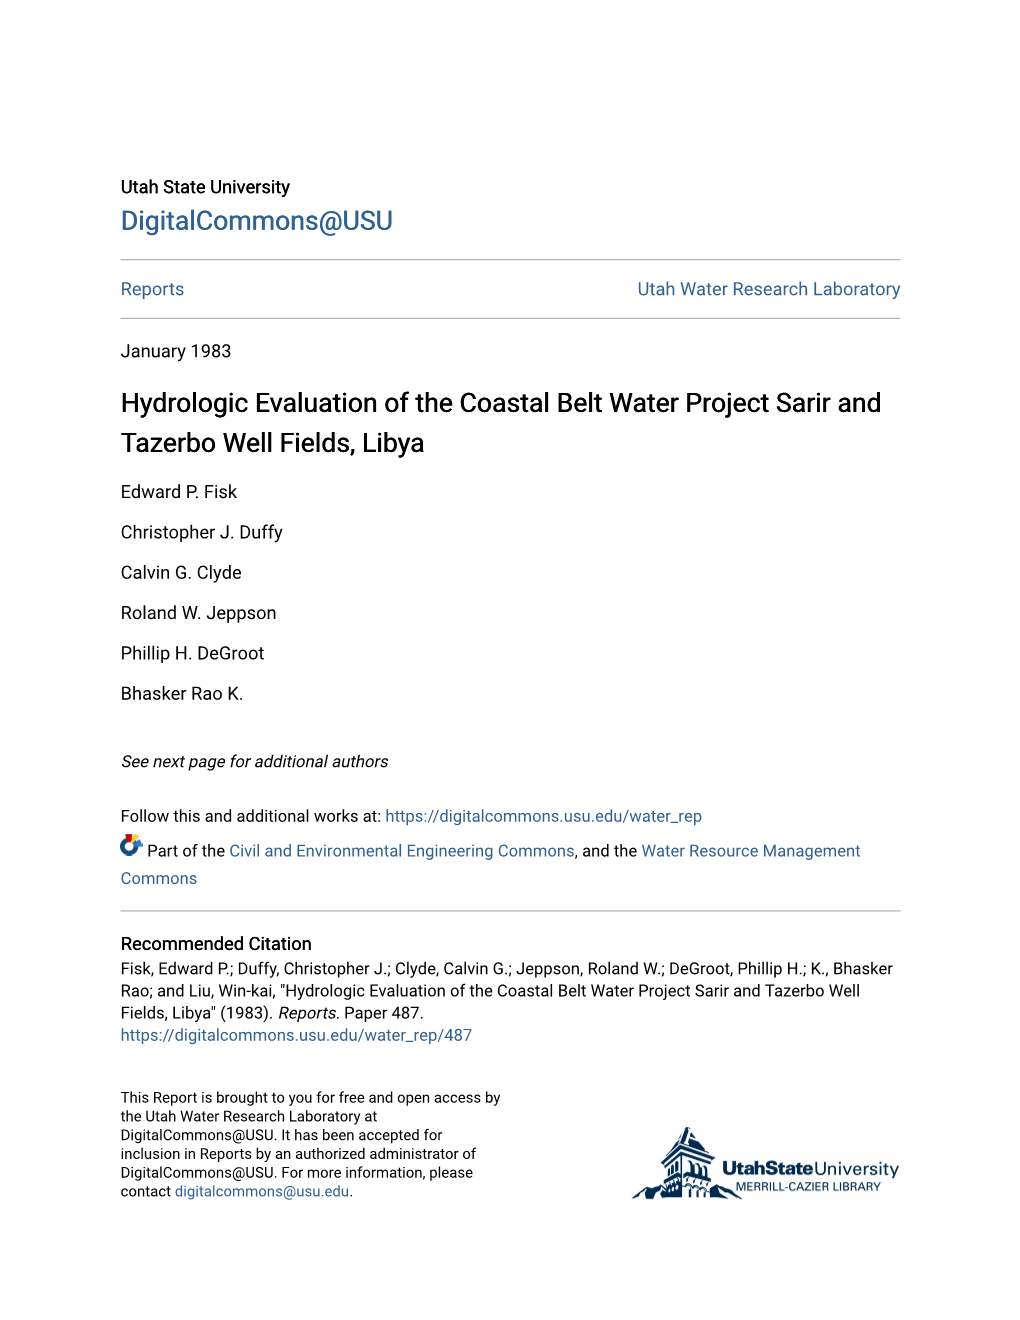 Hydrologic Evaluation of the Coastal Belt Water Project Sarir and Tazerbo Well Fields, Libya